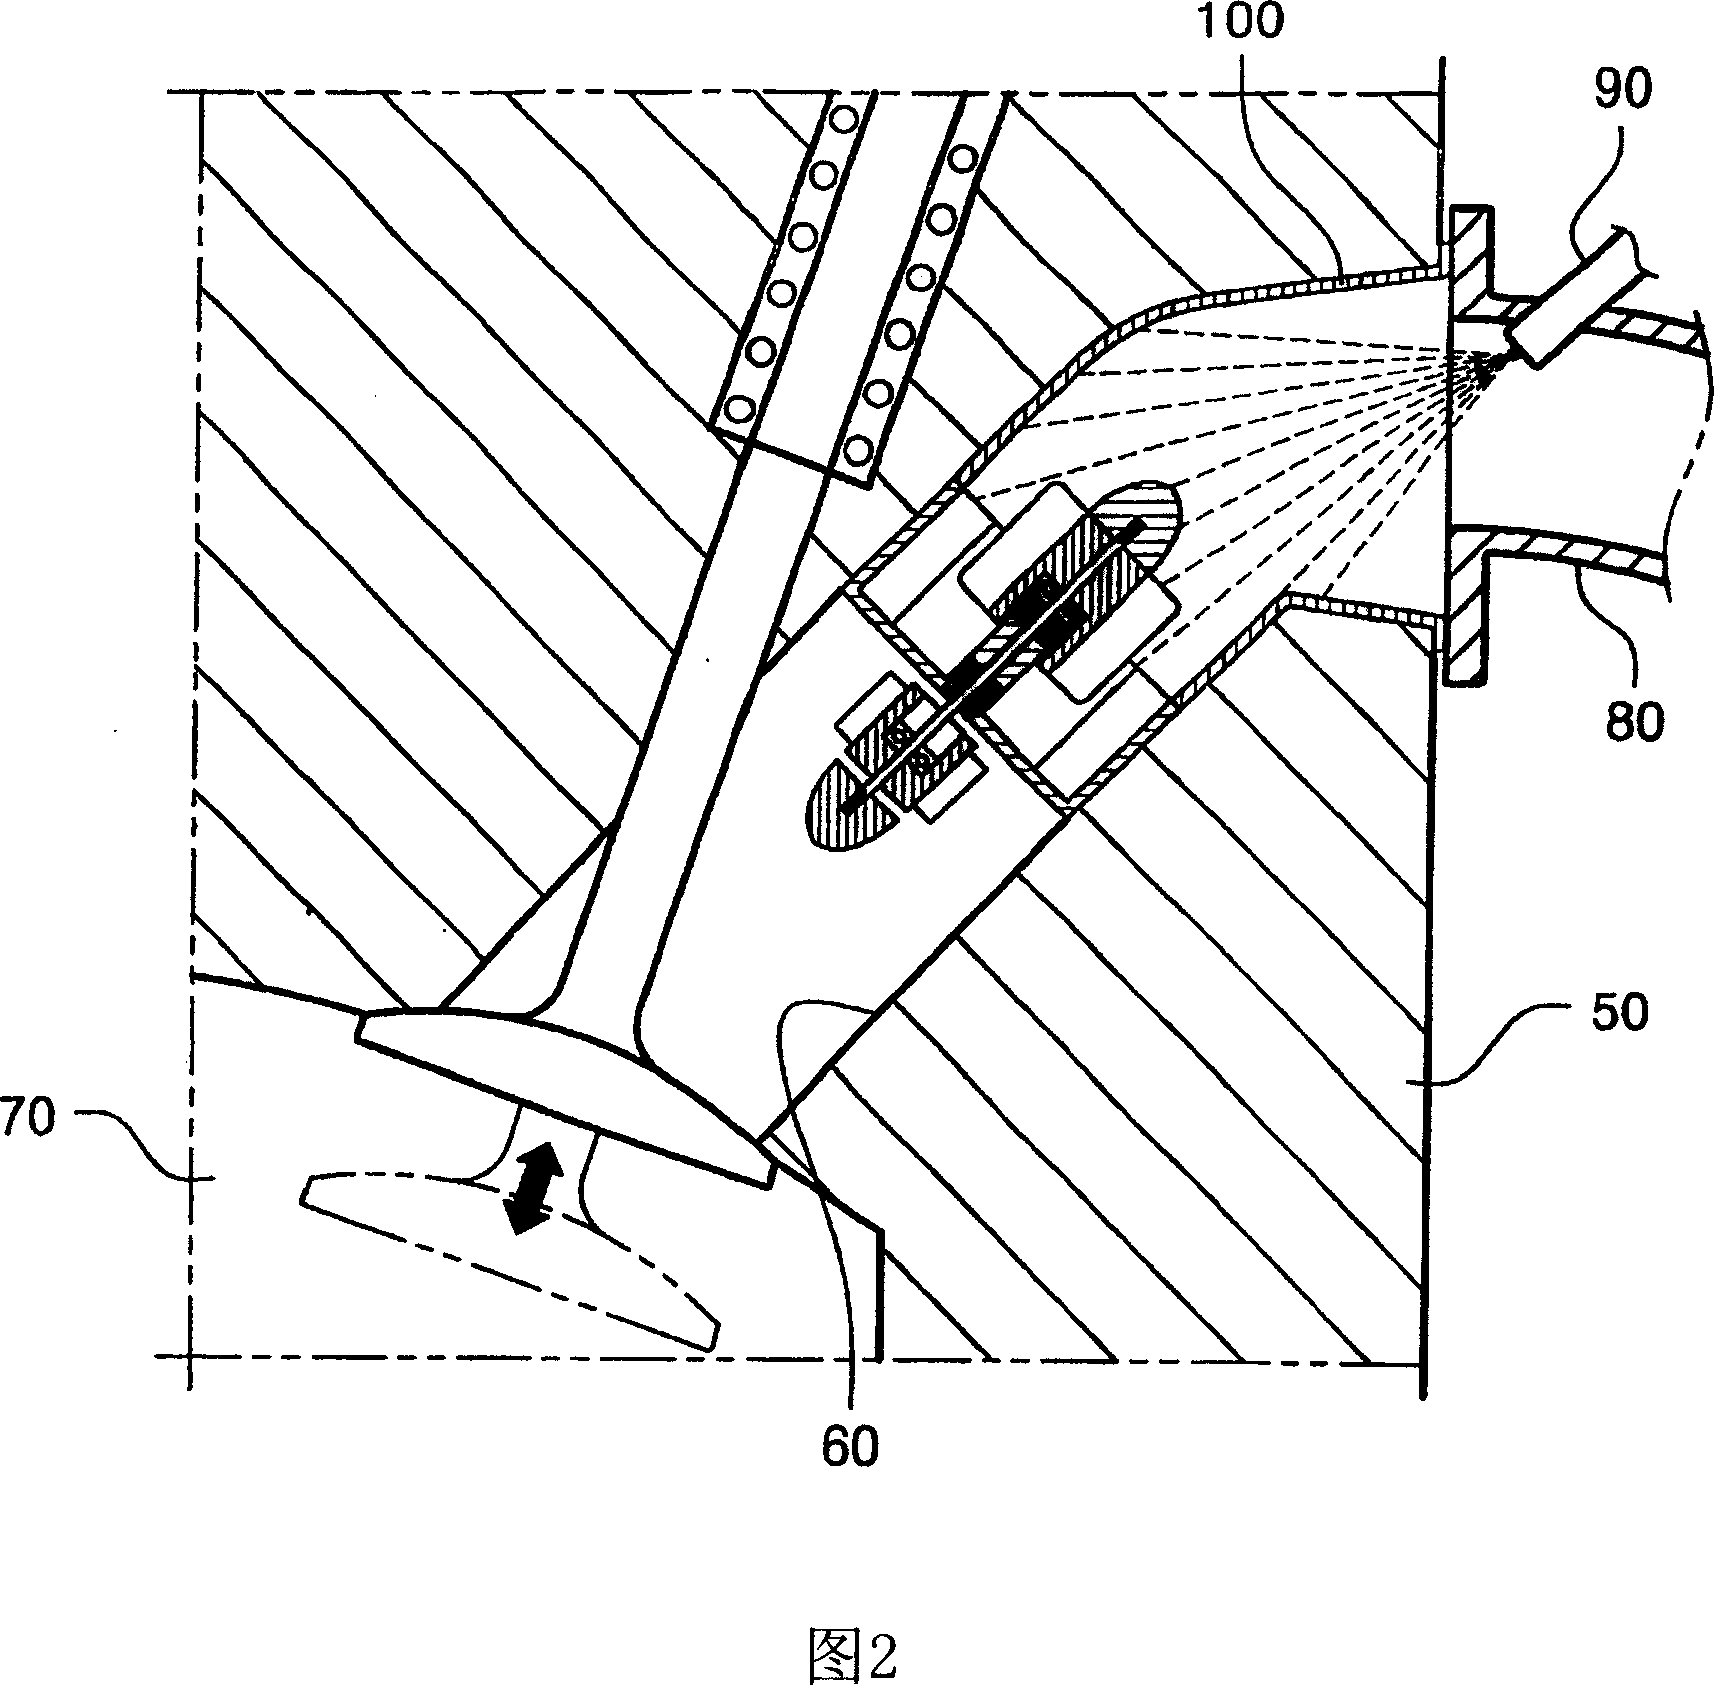 Internal combustion engine having fuel mixing means installed in intake port